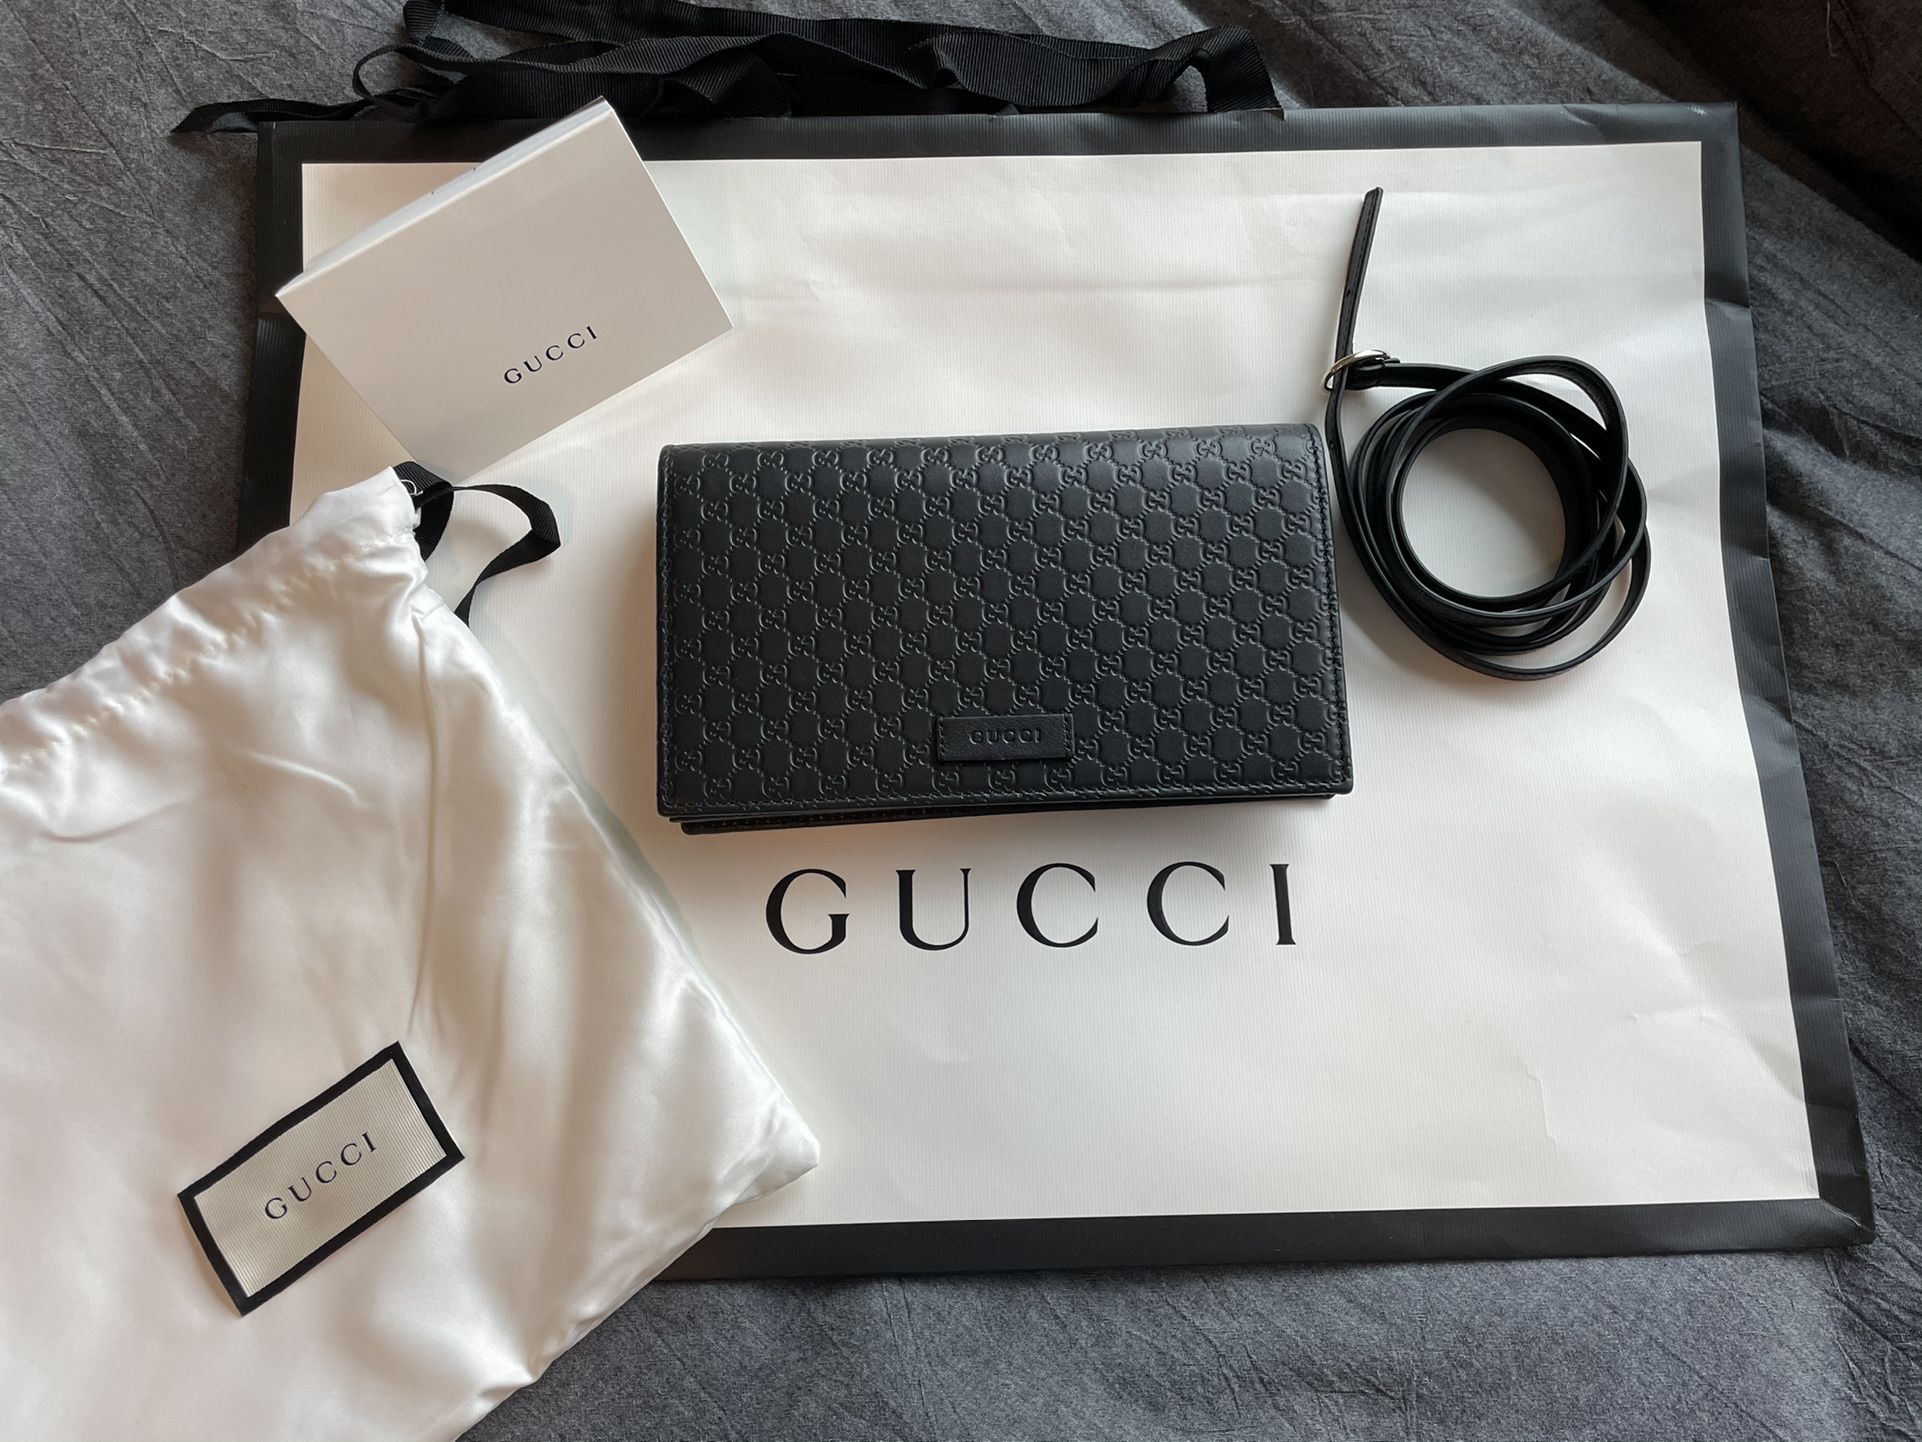 Gucci Clutch New Embossed Gg Logo Wallet Black Leather Cross Body Bag